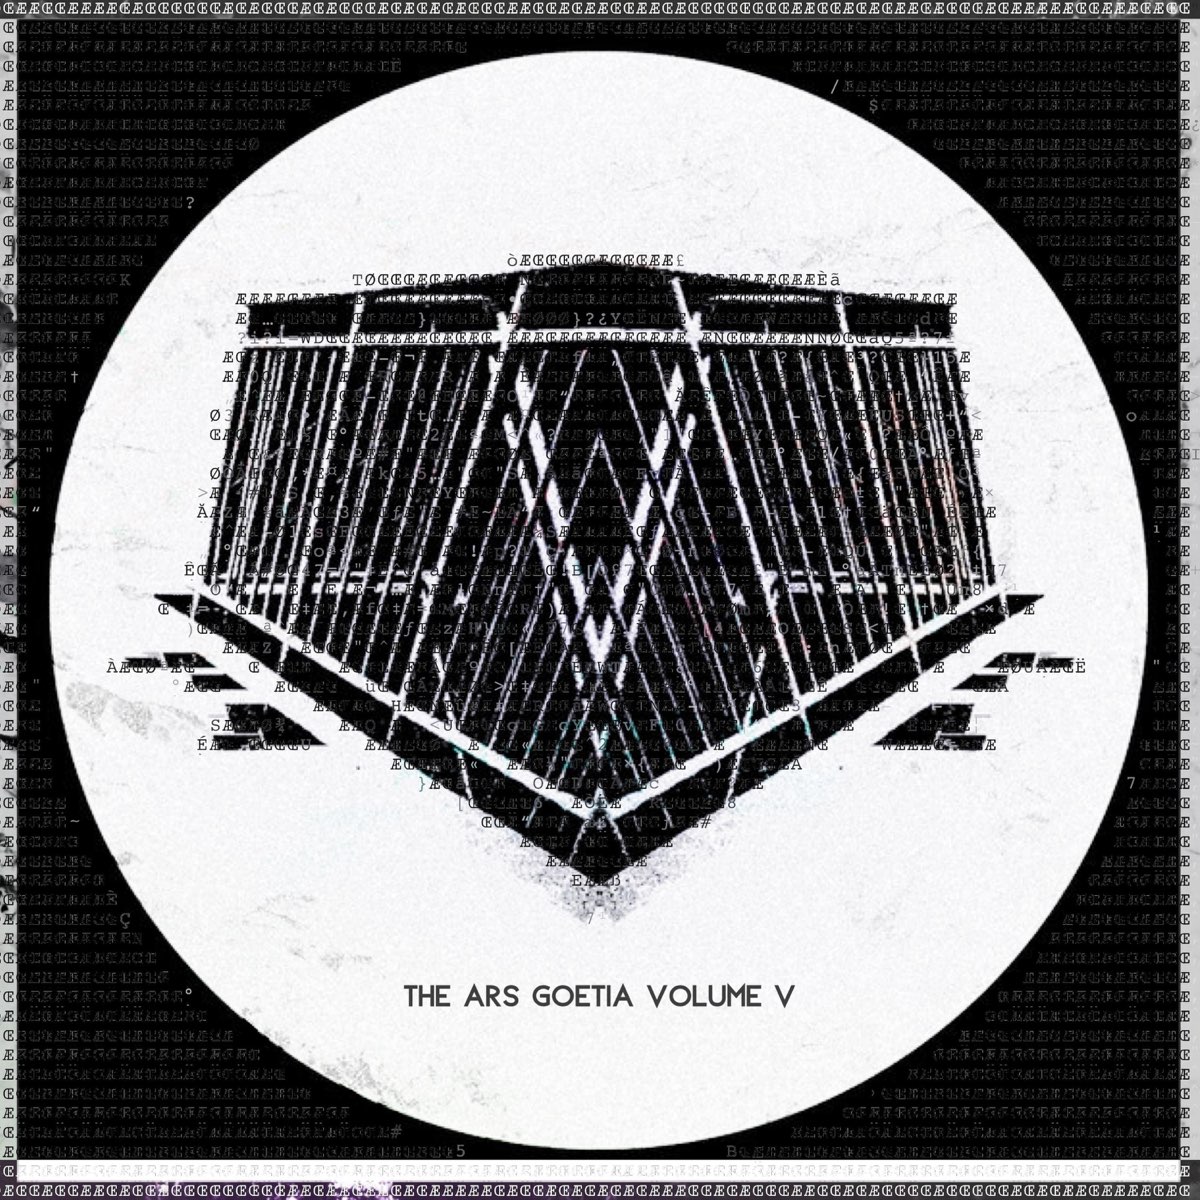 The Ars Goetia Vol 5 By Plant One Idea Instead On Apple Music